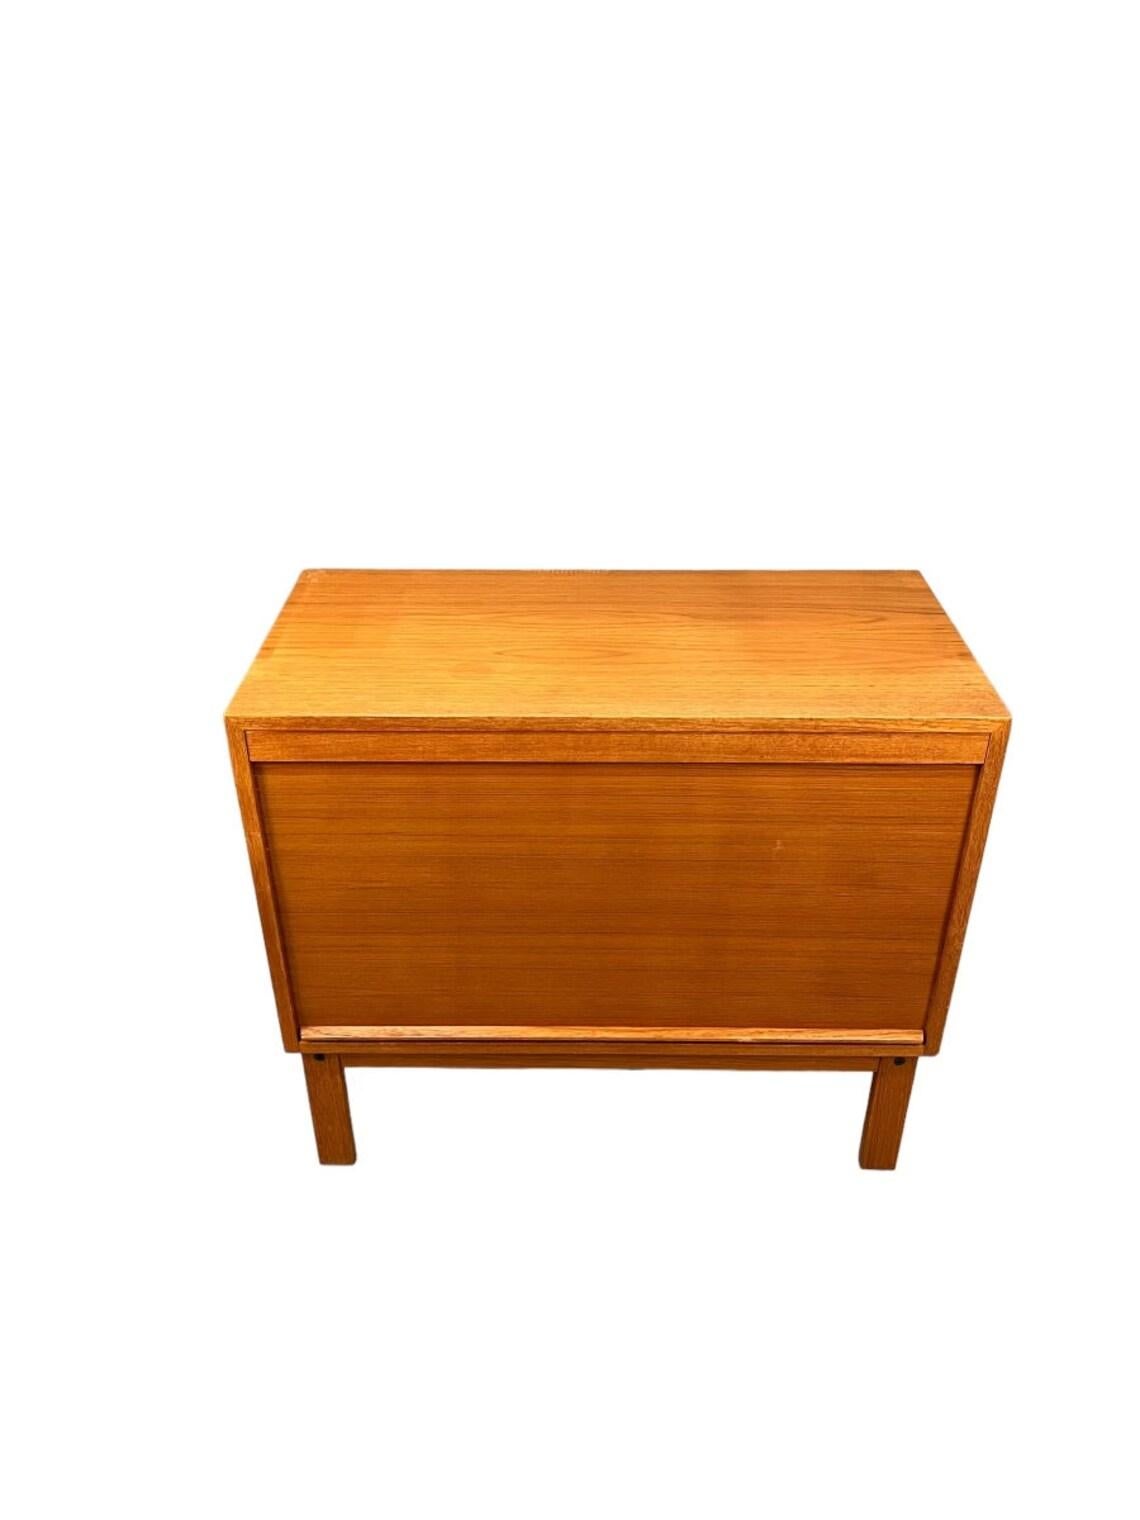 This mid-century modern teak cabinet from Denmark is a stylish and functional addition to any room. With a sliding door and (7) sliding drawers, it is perfect for storing files, books, or any other household item. The cabinet is made of high-quality